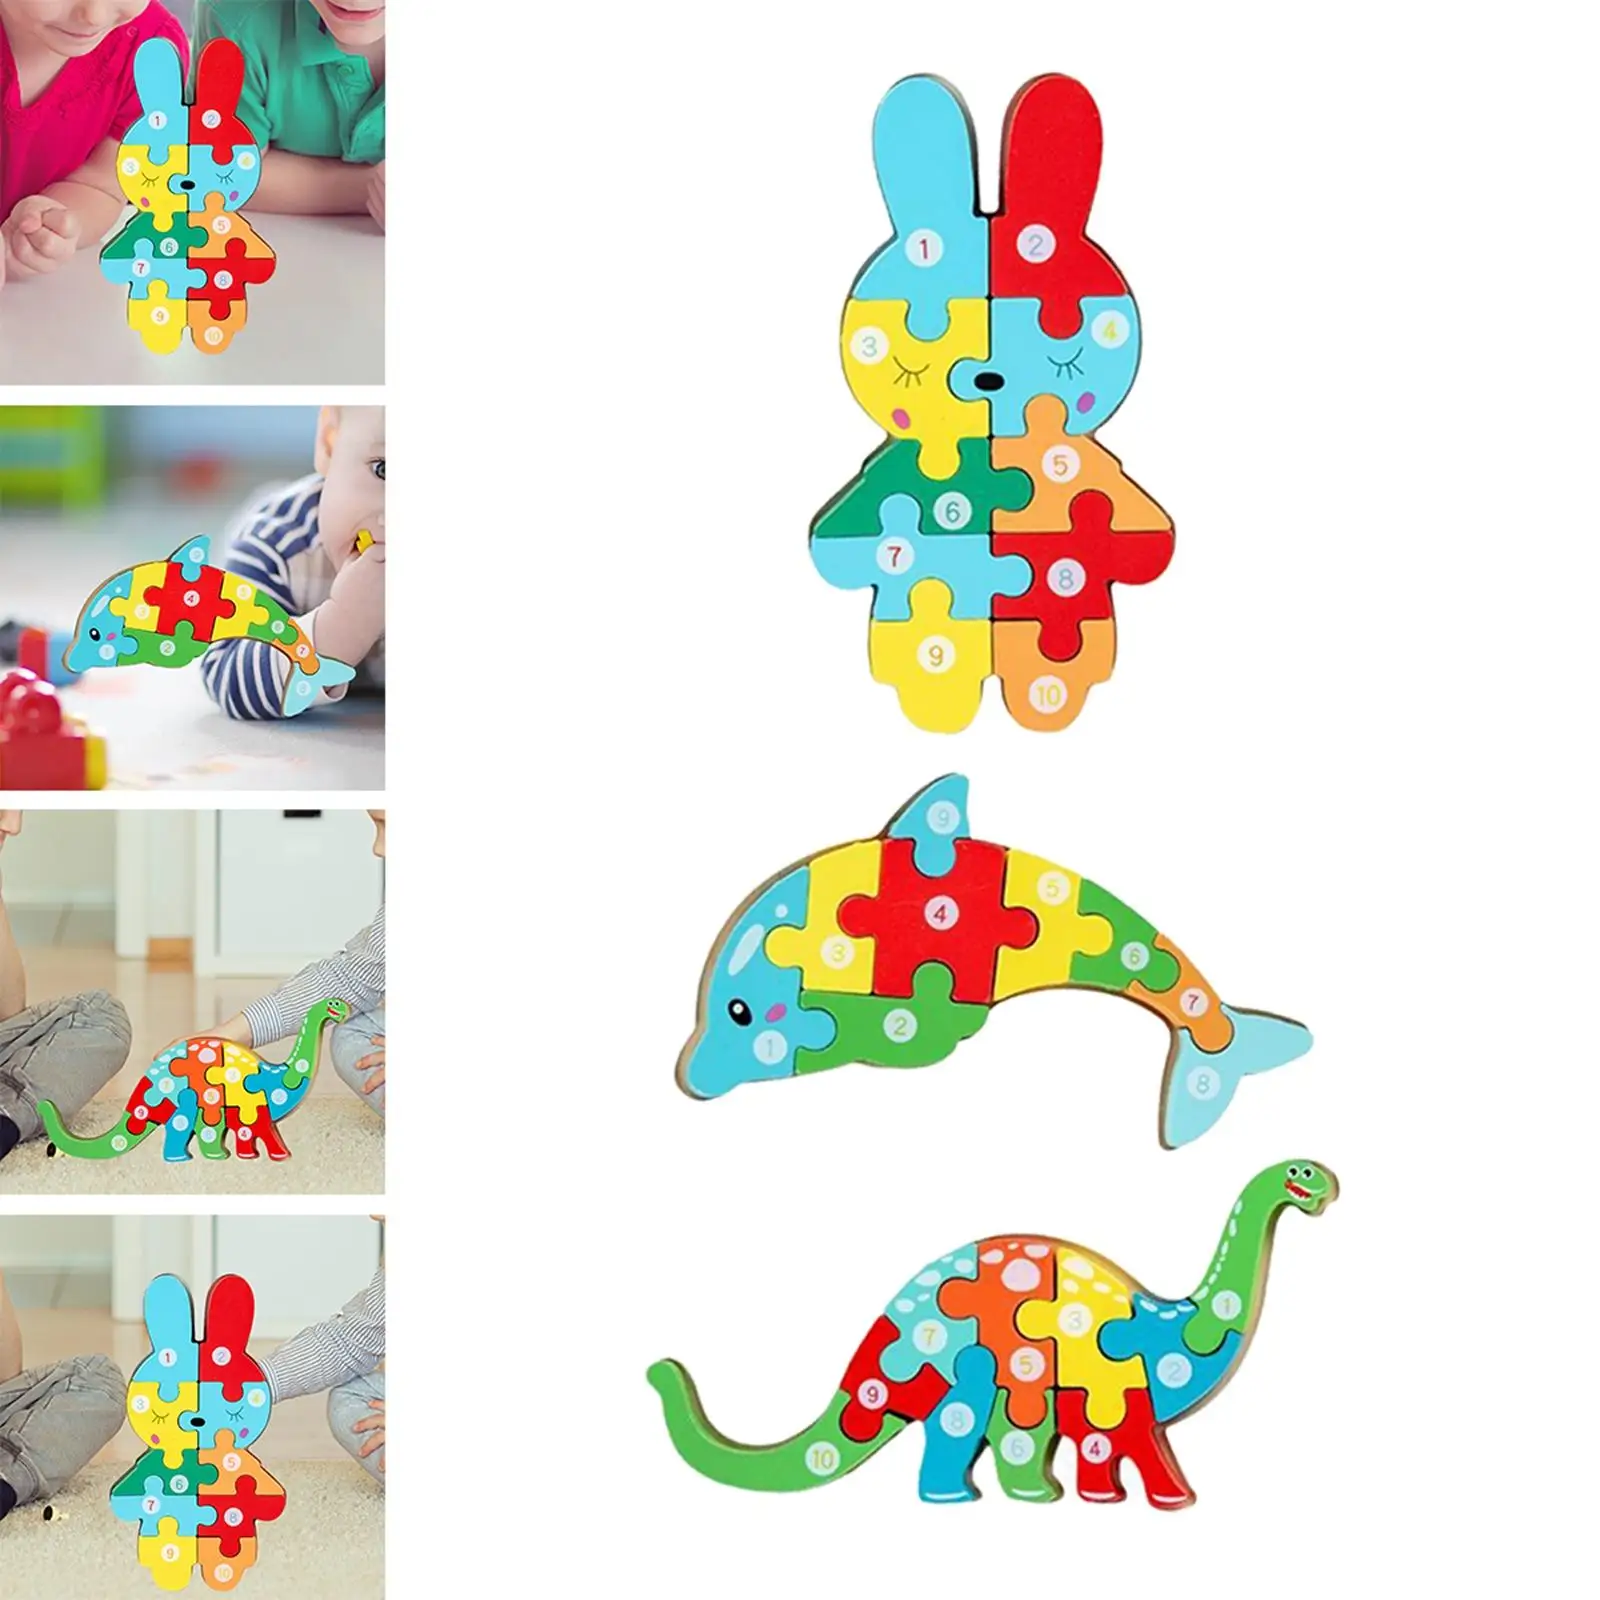 3D Animal Shape Jigsaw Puzzle Kids Wooden Toys Ages 2-6 Attractive+3D Animal